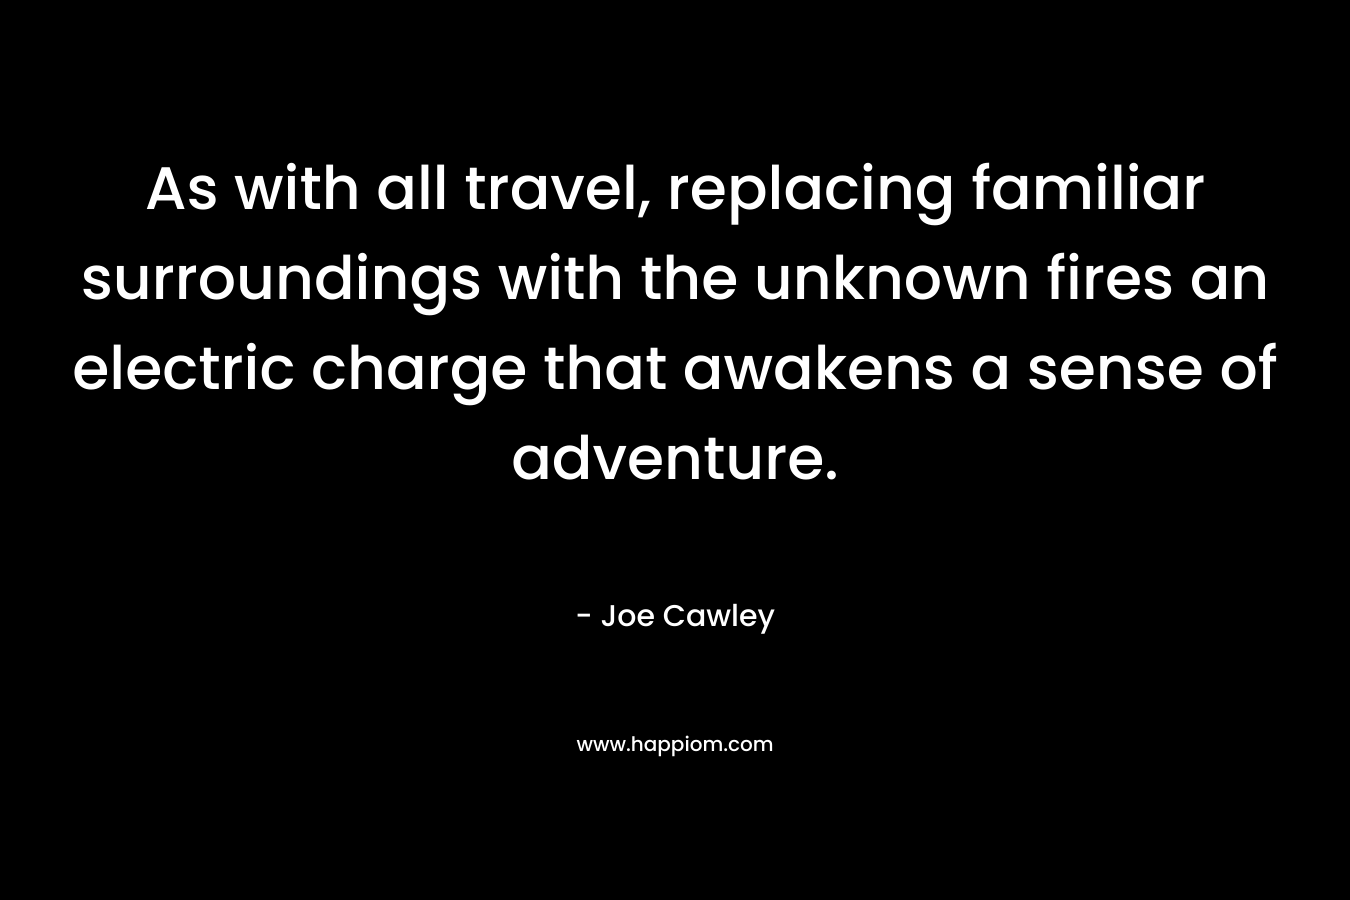 As with all travel, replacing familiar surroundings with the unknown fires an electric charge that awakens a sense of adventure. – Joe Cawley